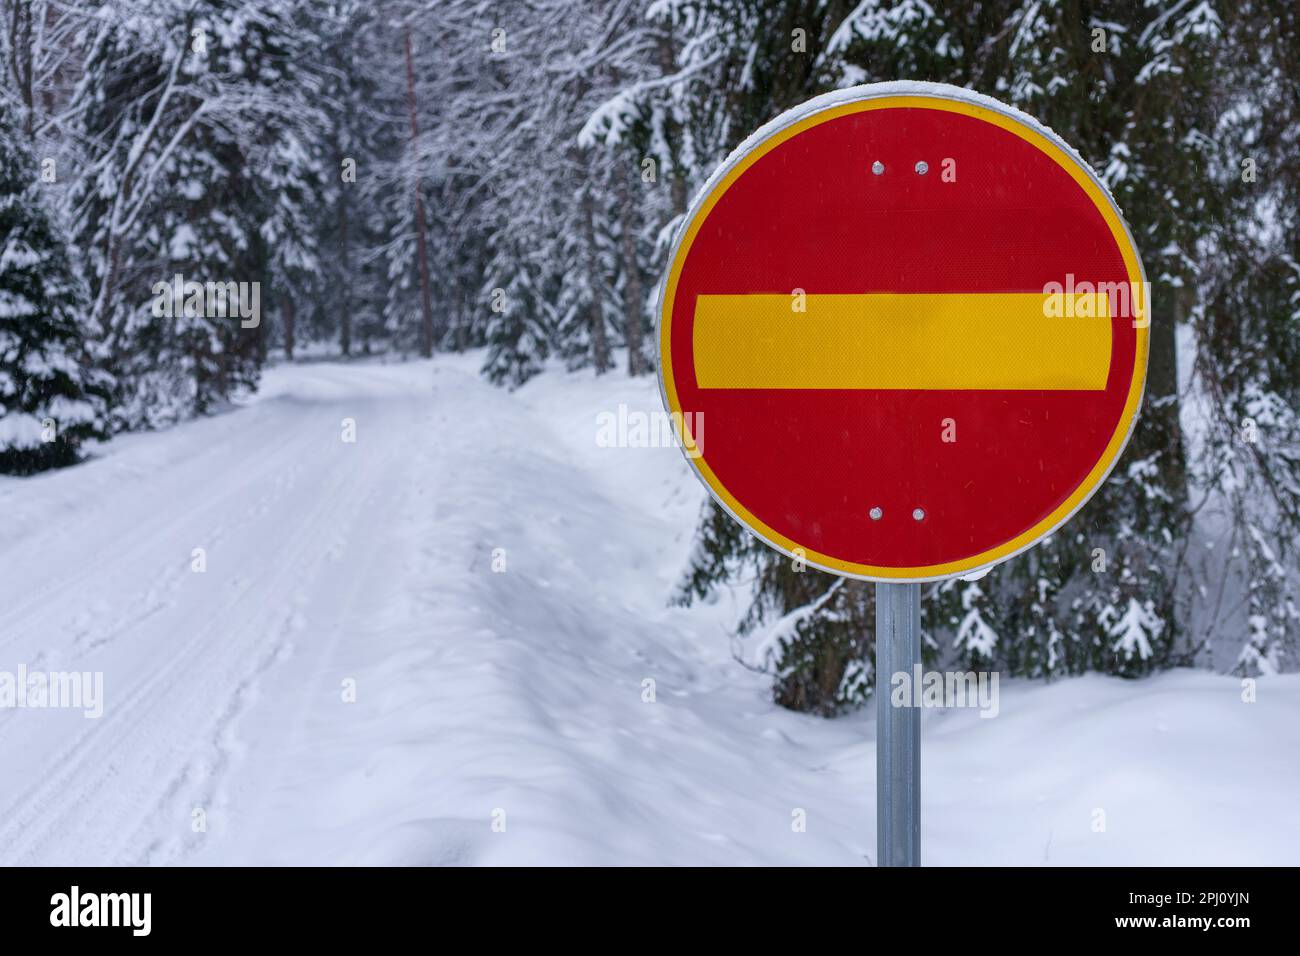 No entry traffic sign next to a snow covered road in winter. Hameenlinna, Finland. Stock Photo